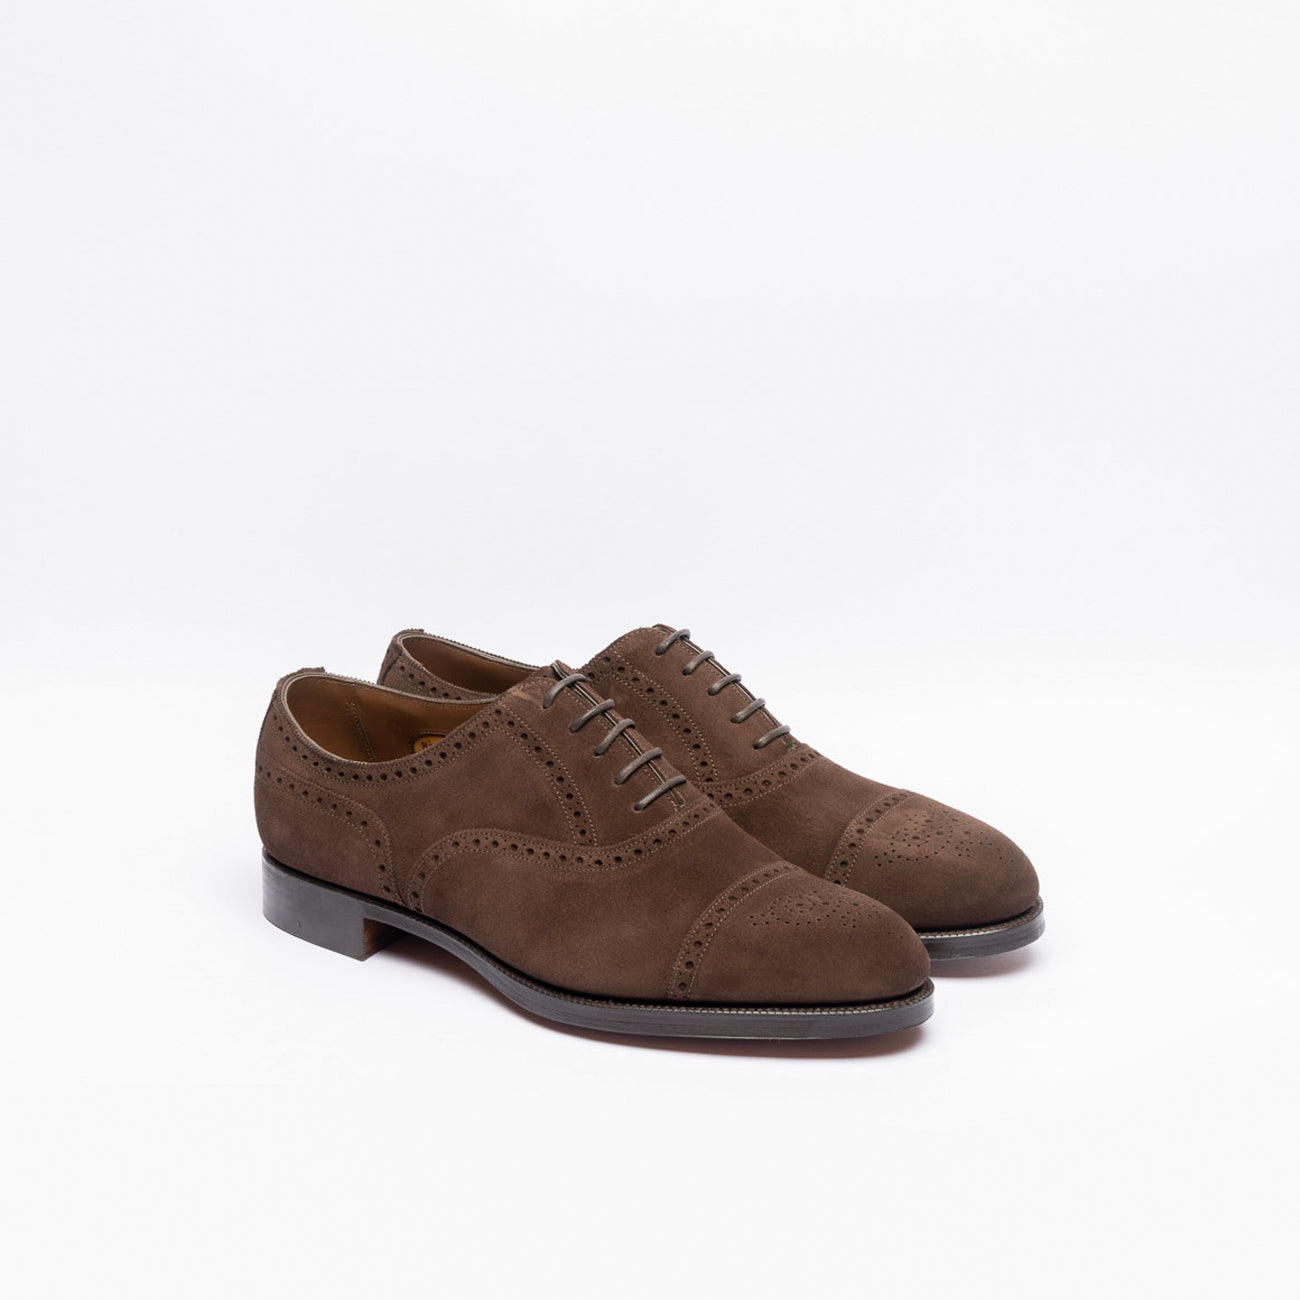 Edward Green Cadogan oxford lace-up in brown suede